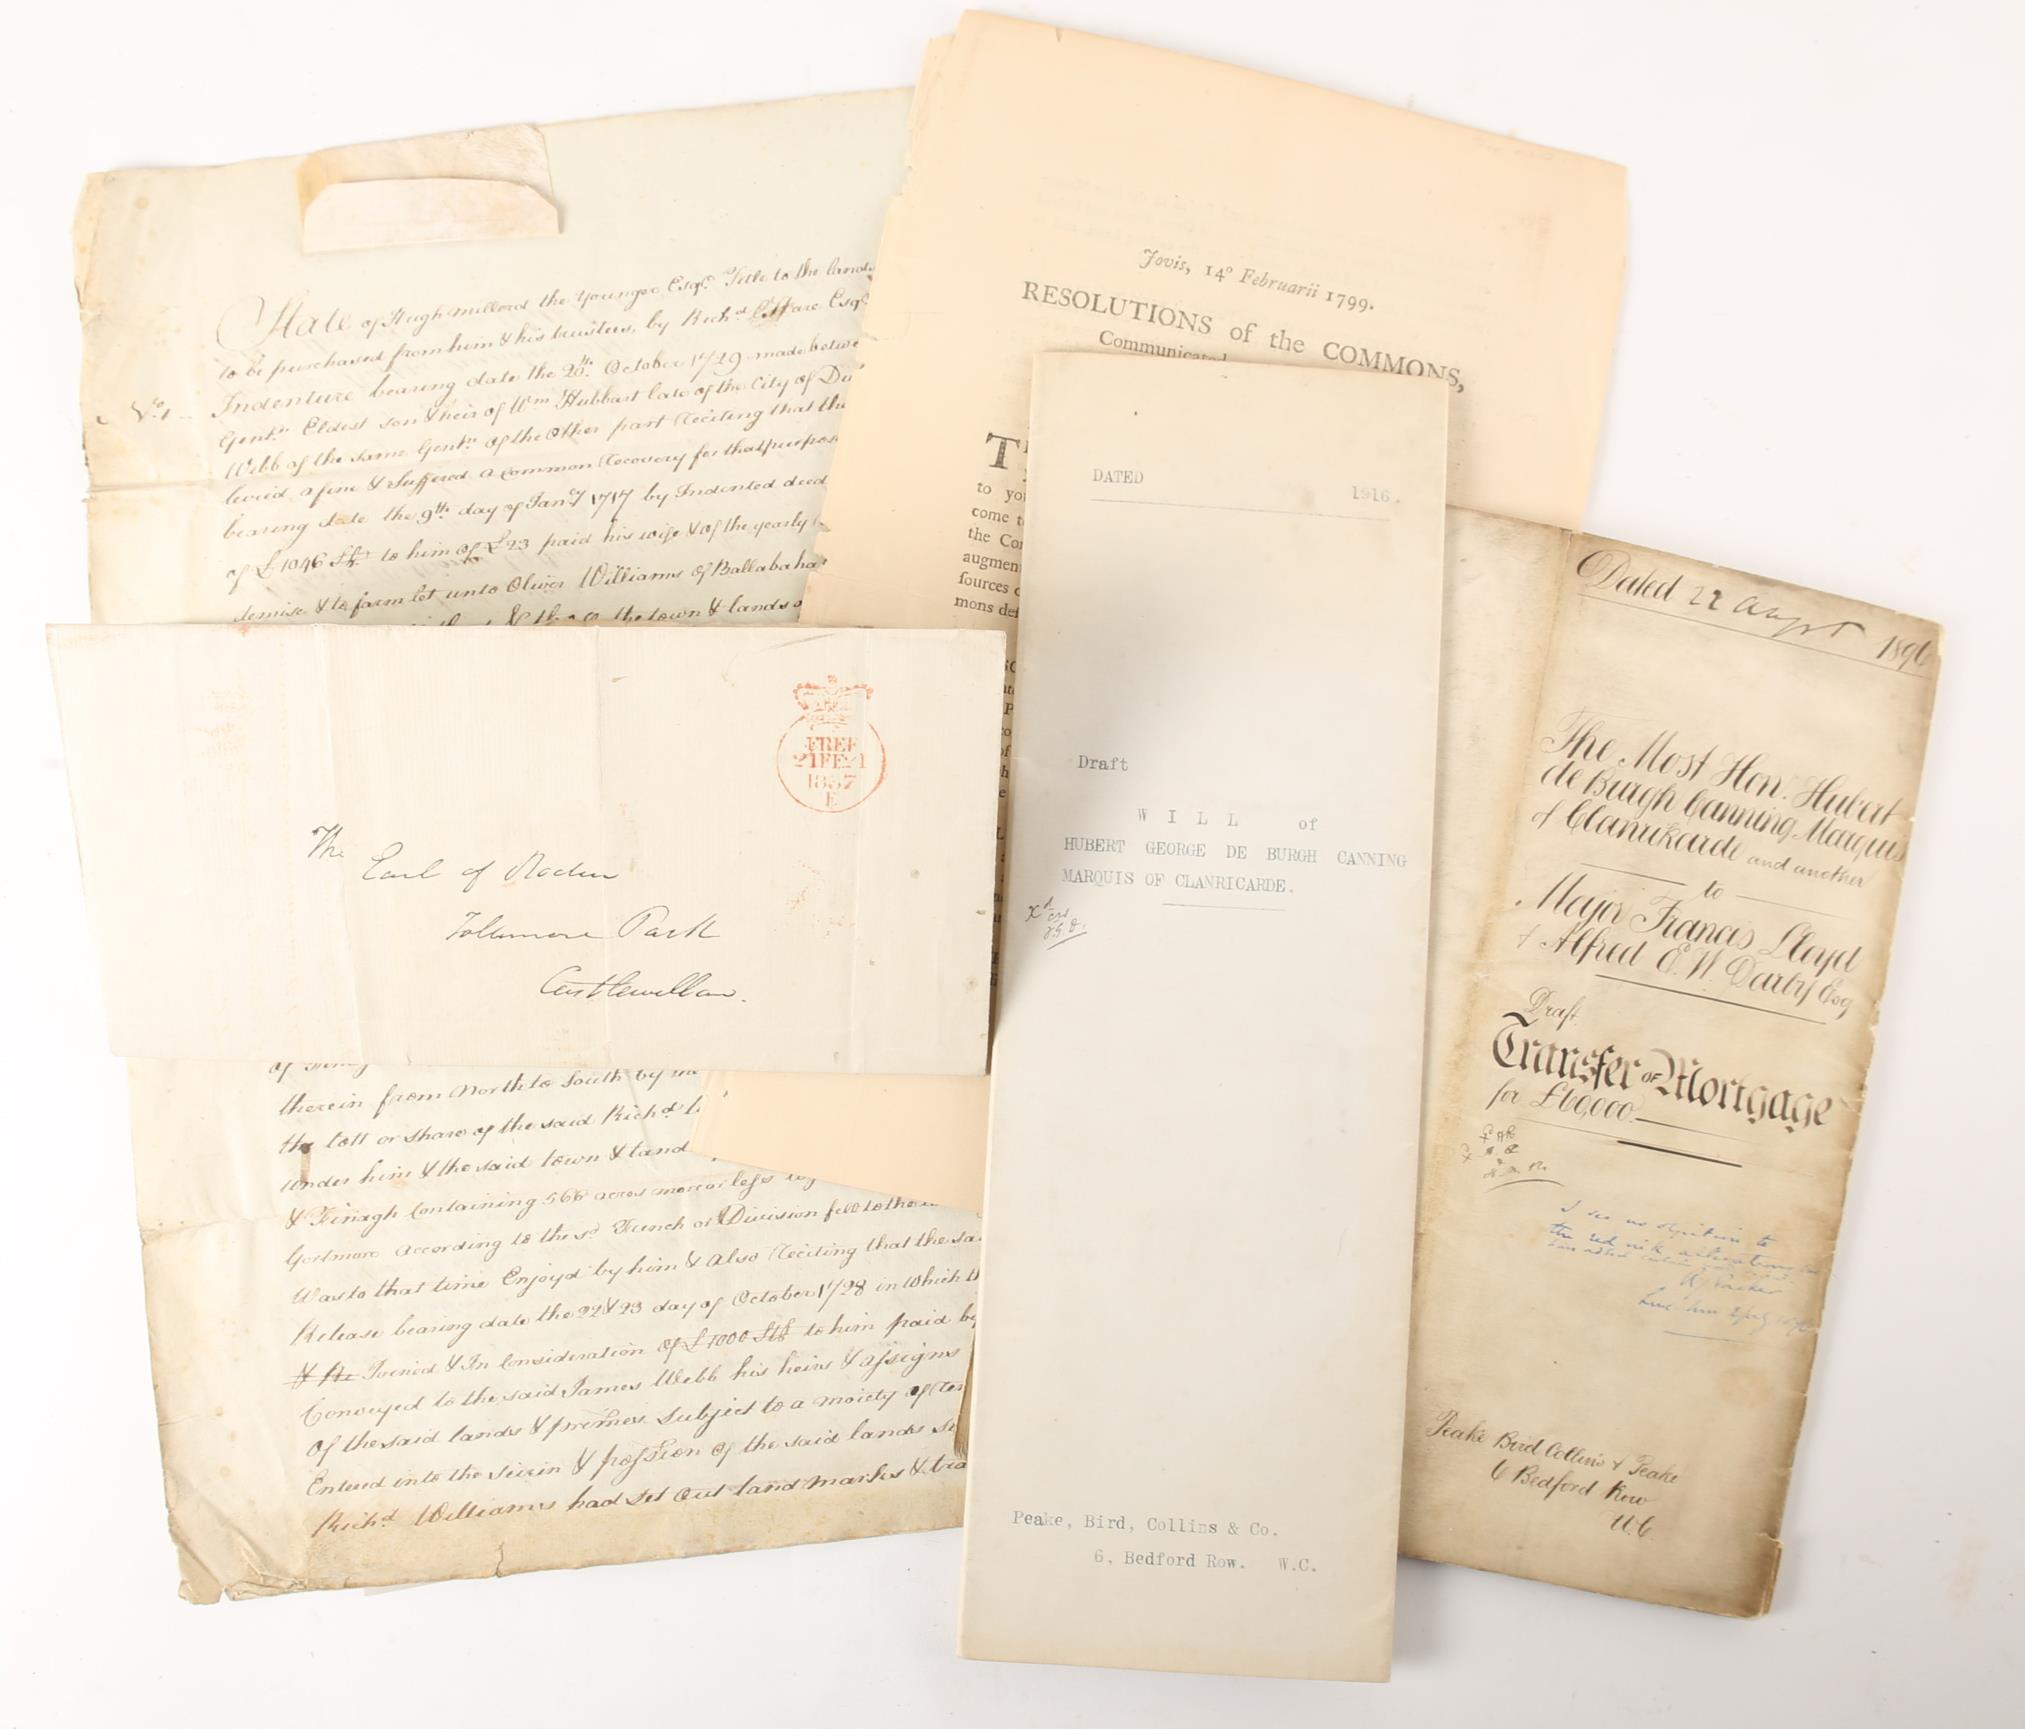 Irish legal documents. 1729 Indenture between William Hubbert, Dublin and James Web relating to a